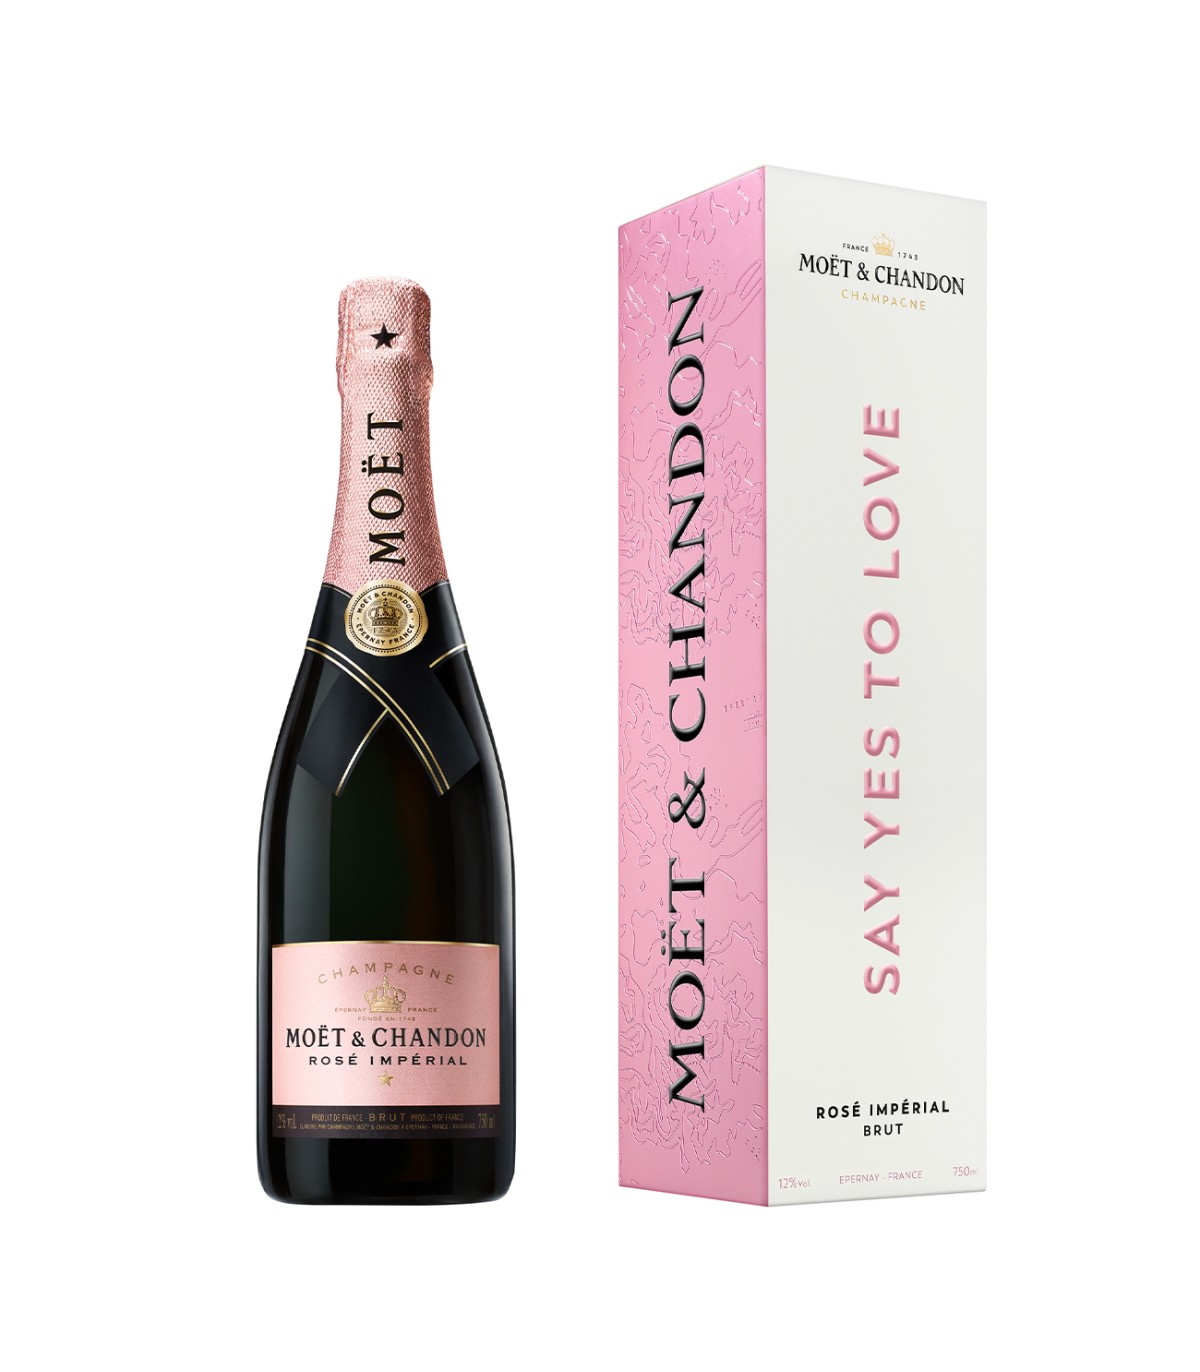 Buy Moet & Chandon : Ice Imperial Rose Champagne online